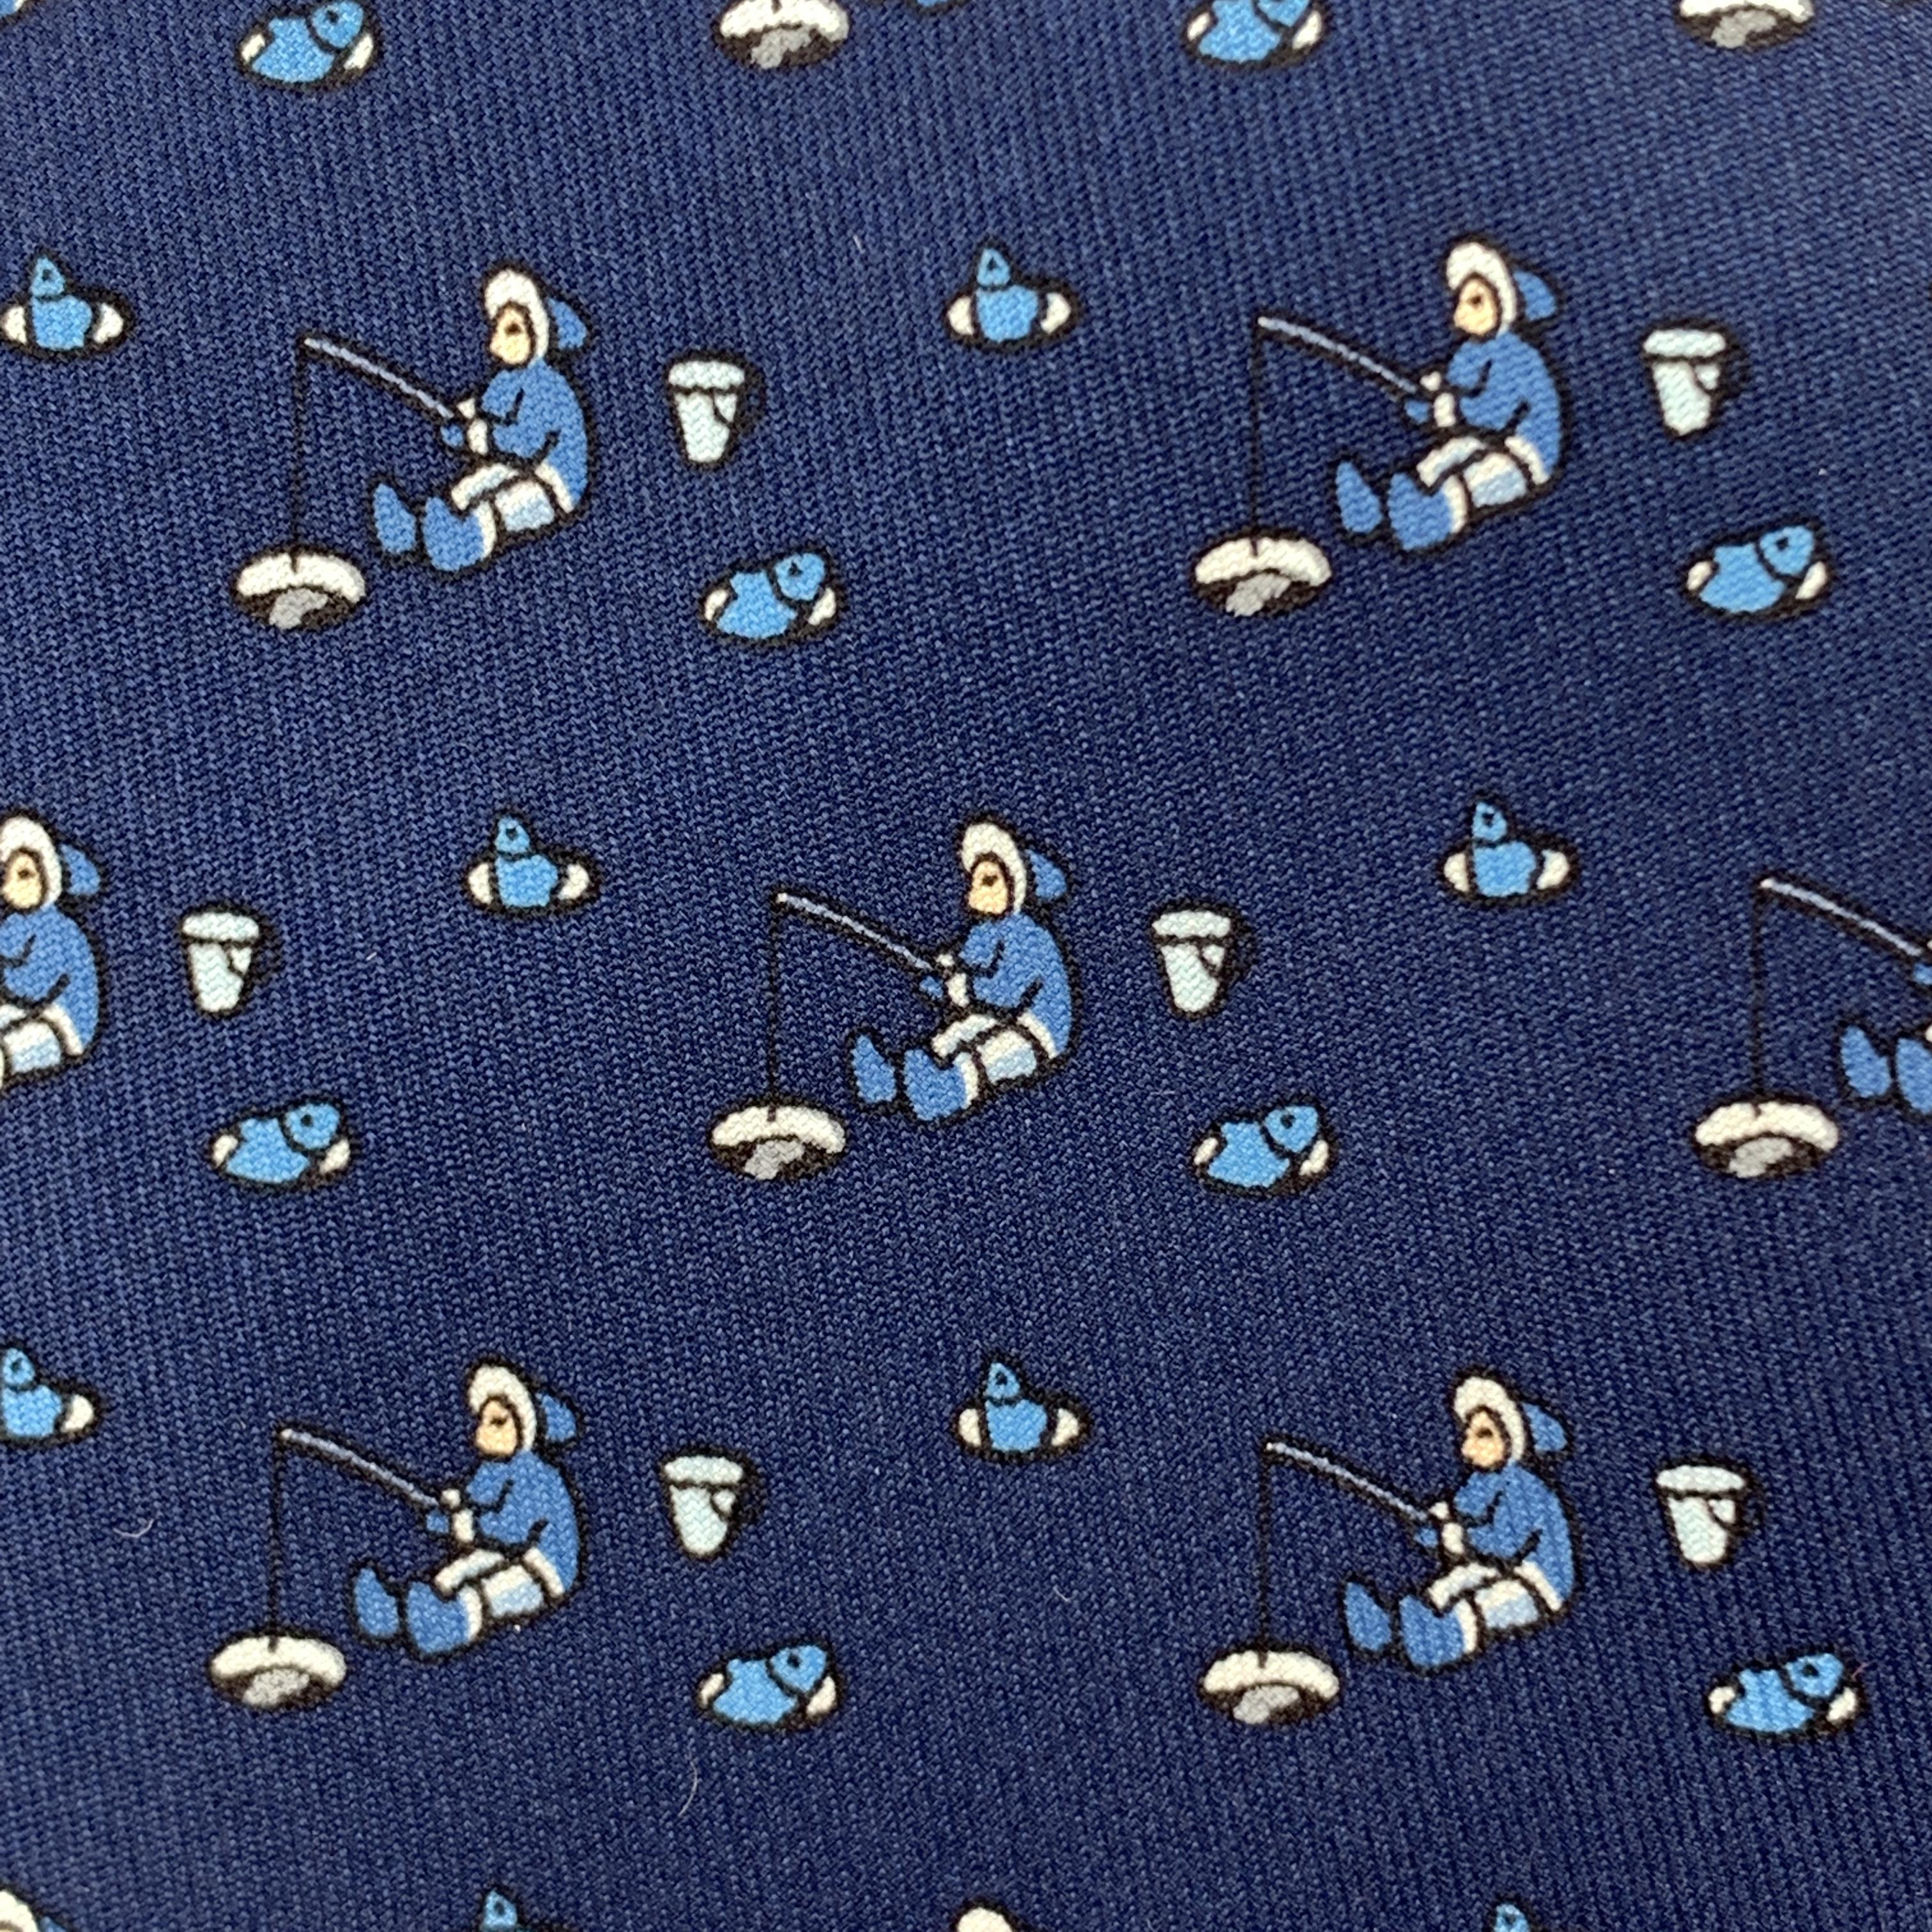 HERMES necktie comes in navy blue silk twill with all over Arctic fisherman print. Made in France.

Excellent Pre-Owned Condition.

Width: 3.75 in.  